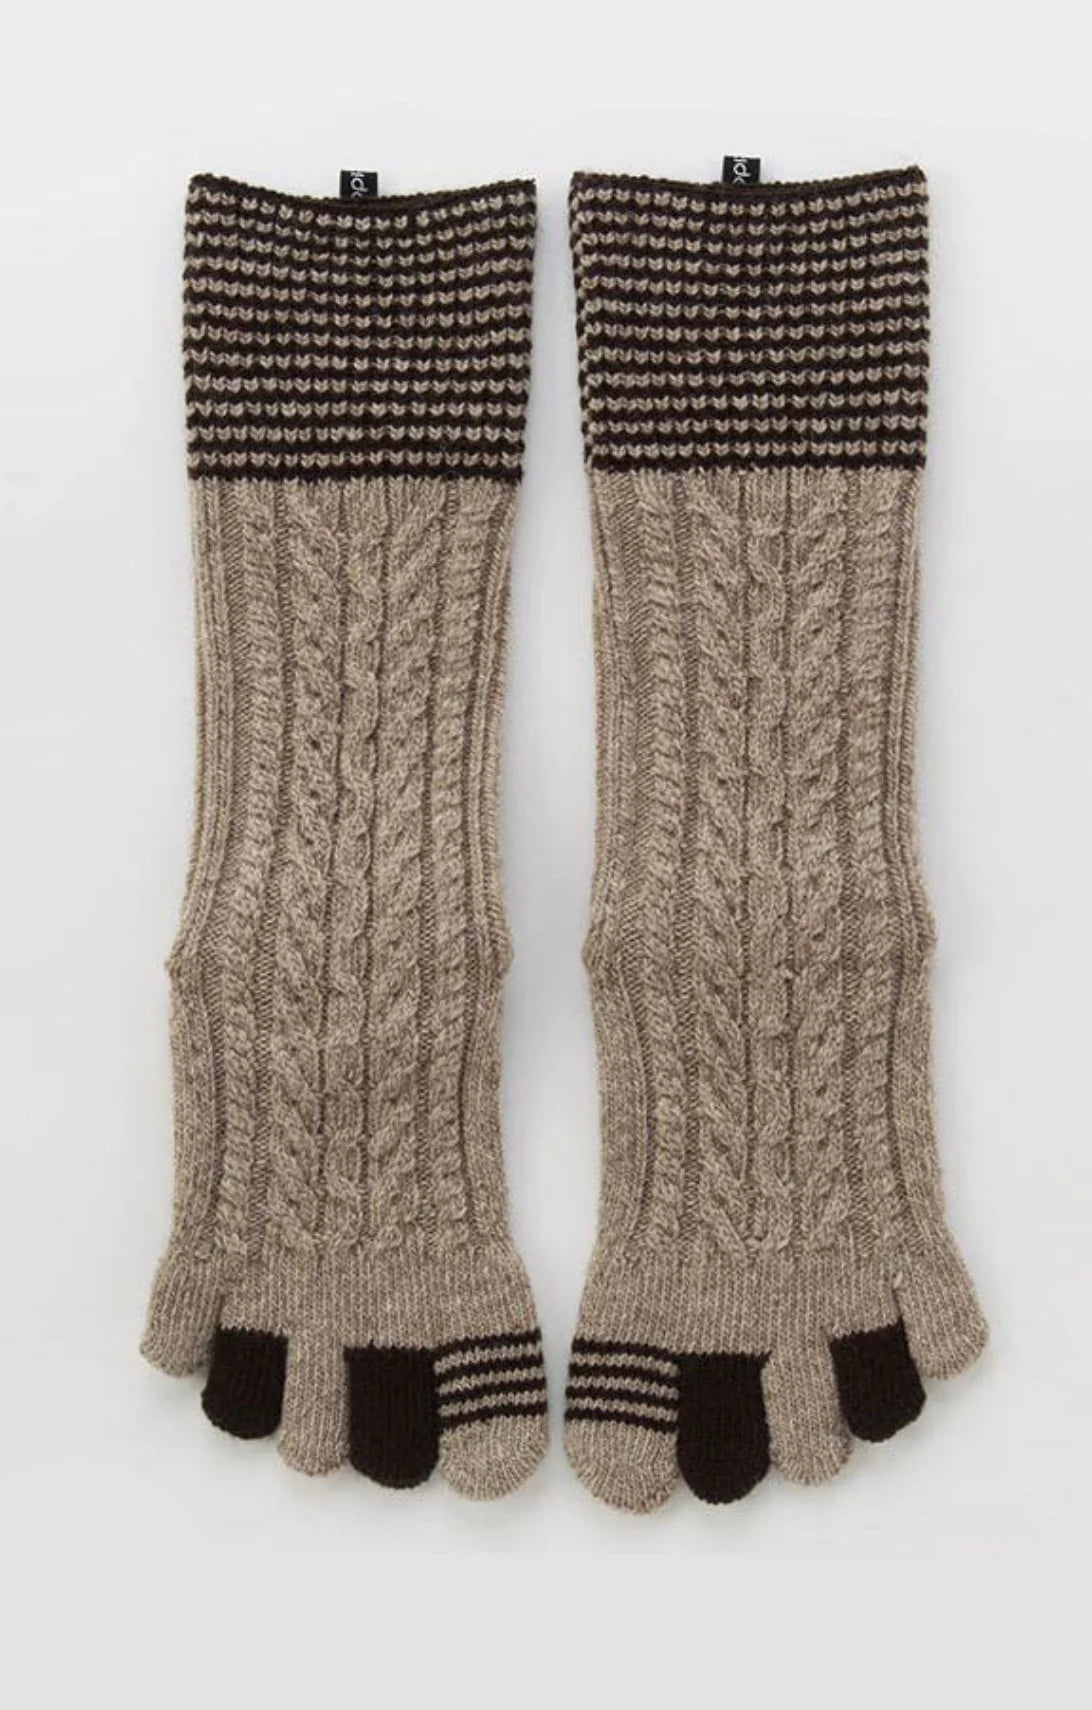 Frontal view of Knitido plus's Wool Blend Cable Striped Midcalf Toe Socks in Beige color